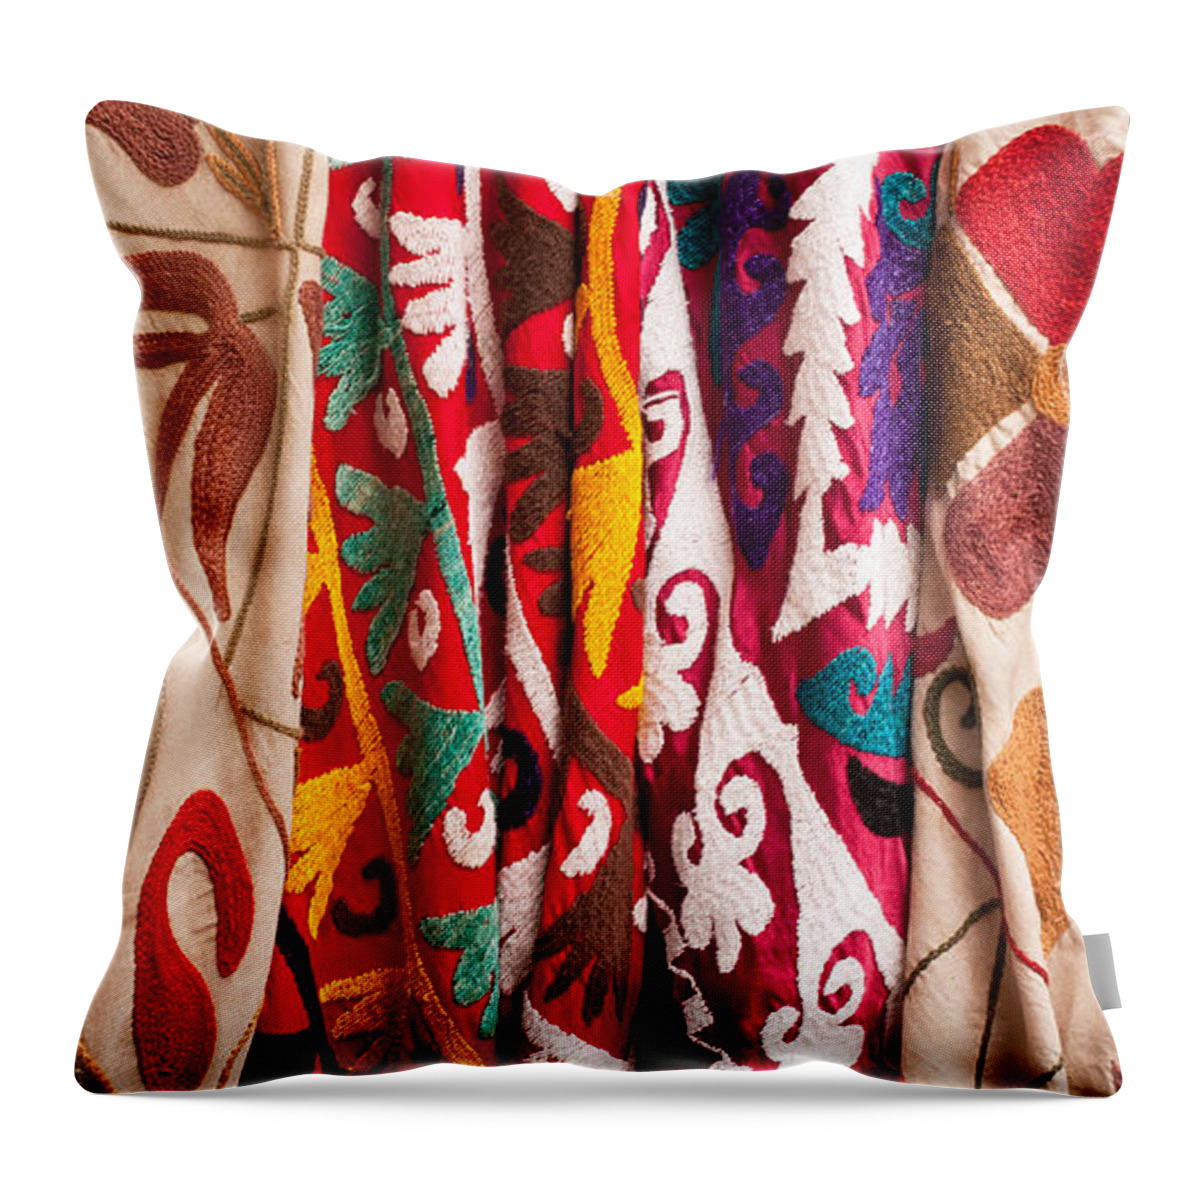 Turkish Throw Pillow featuring the photograph Turkish Textiles 04 by Rick Piper Photography